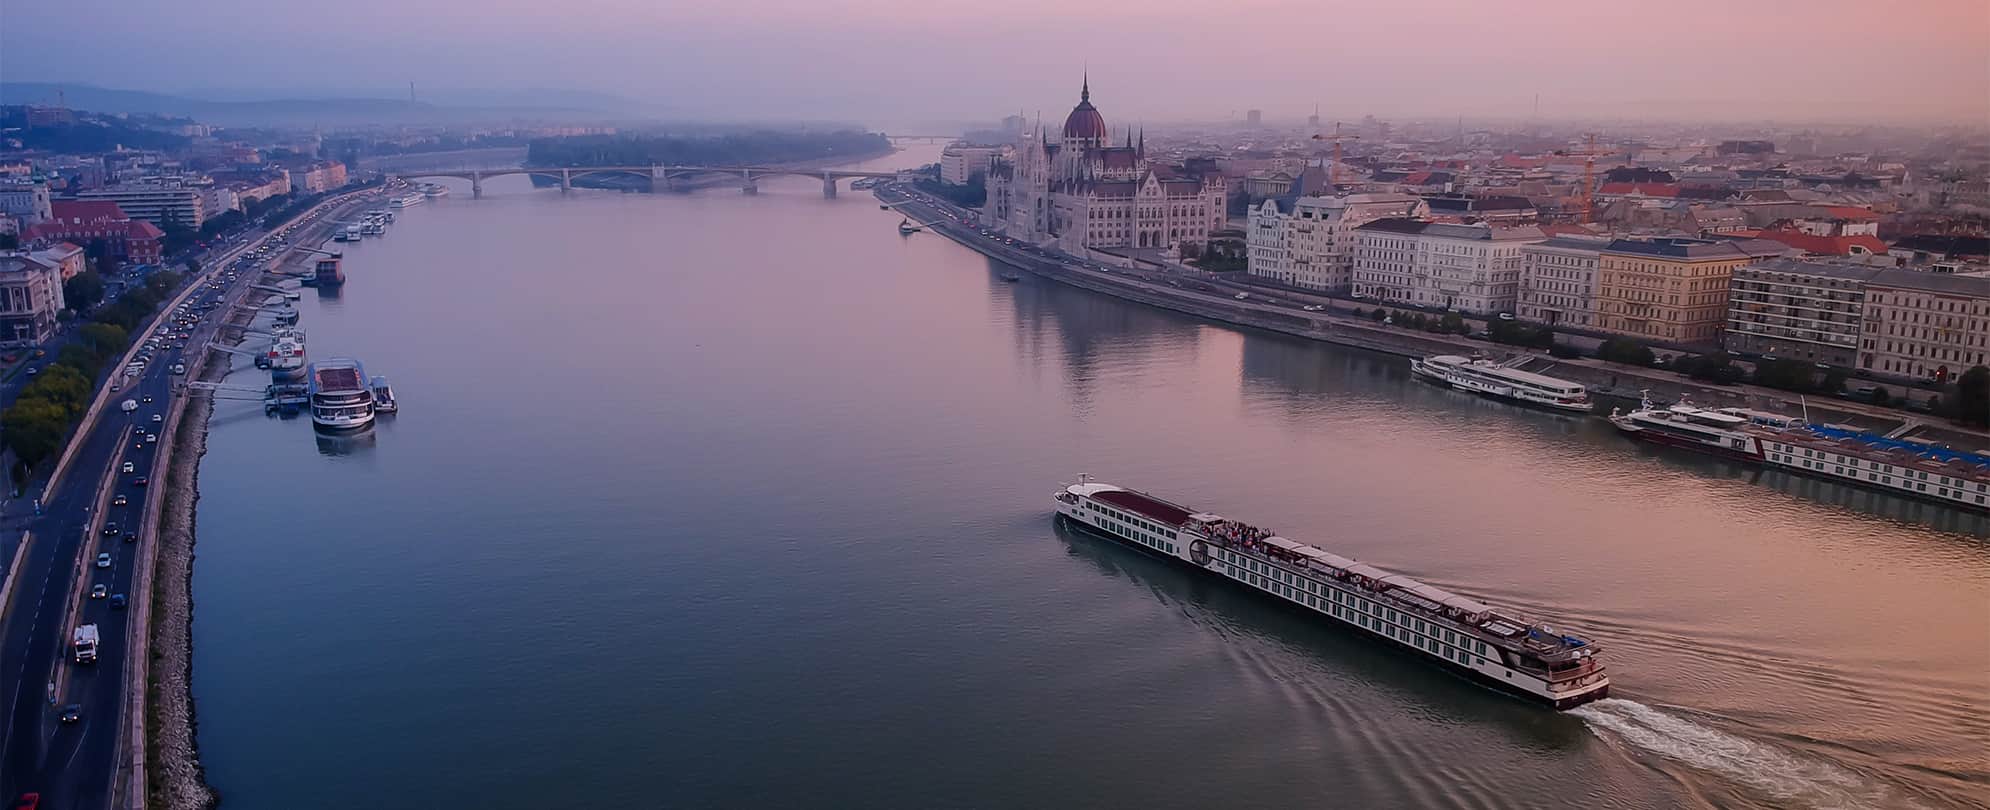 A Club Wyndham river cruise, going through the Banks of the Danube in Hungary.